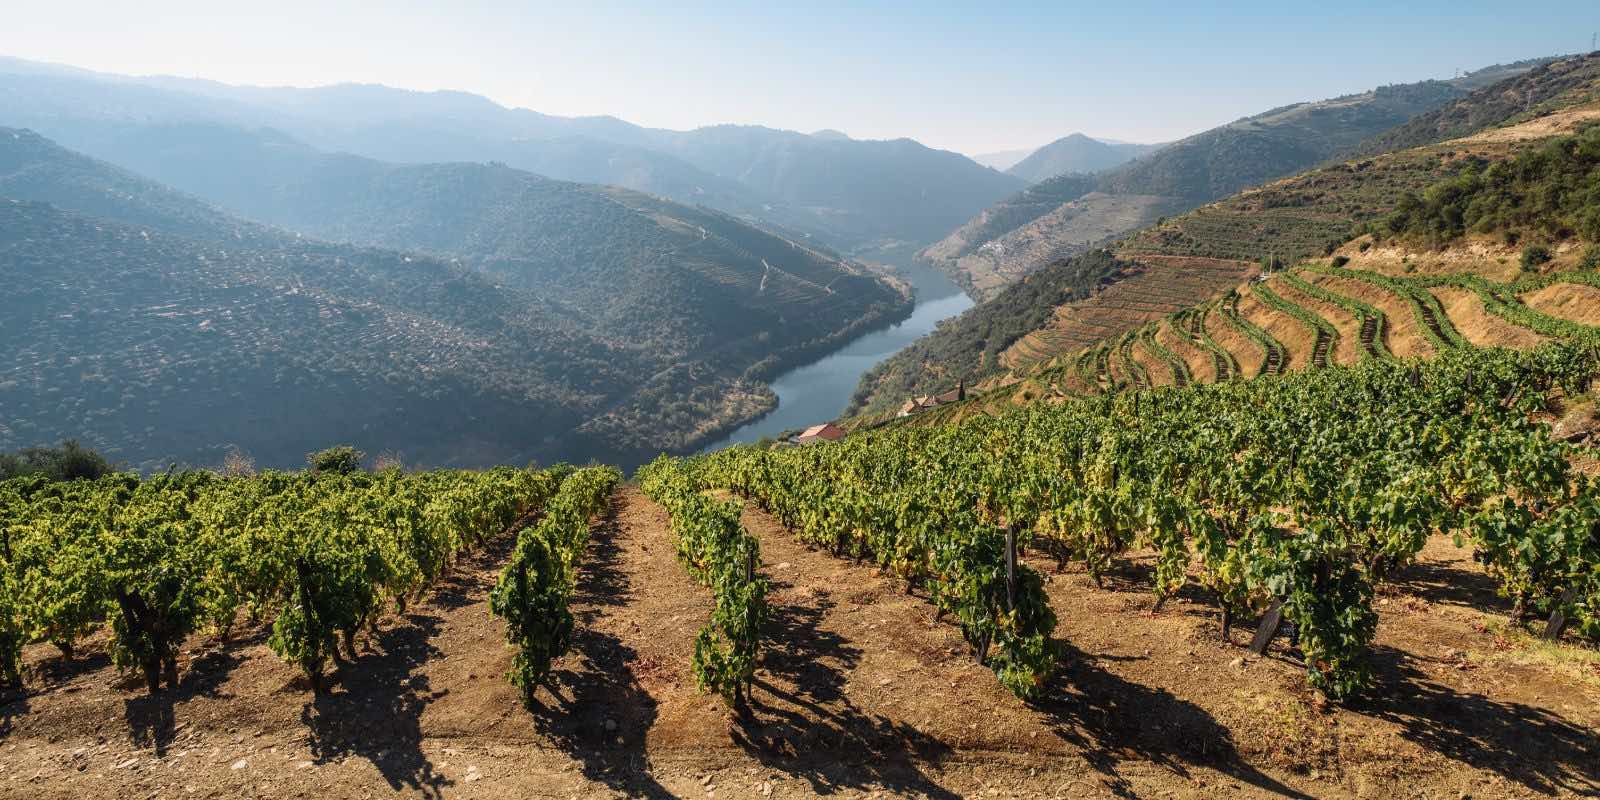 The vineyards in Douro Valley, Portugal